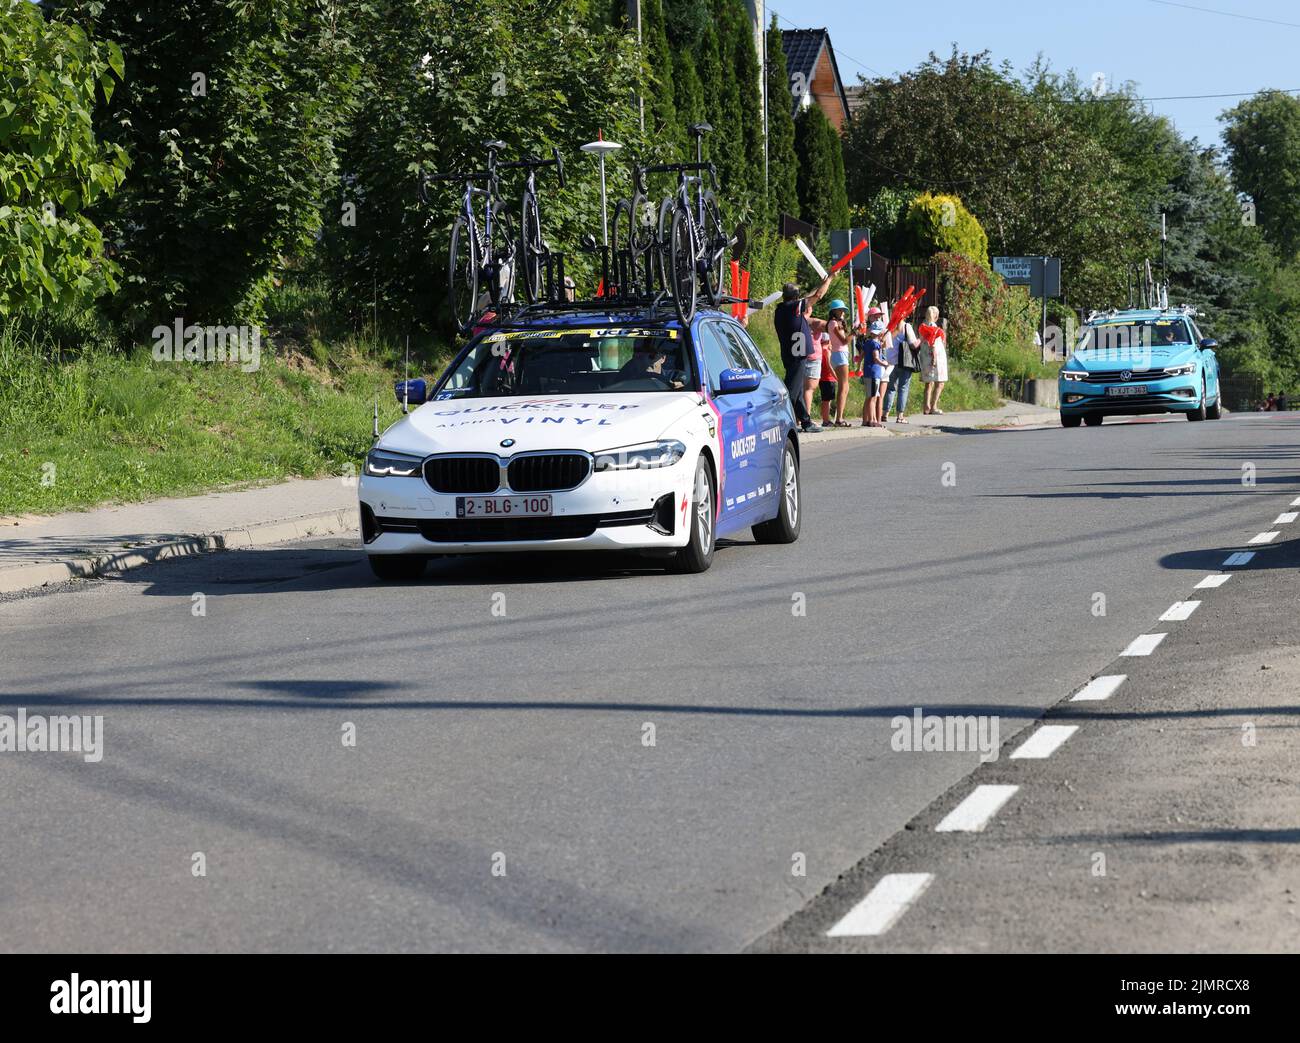 Krakow, Poland - August 5, 2022:  Quick-Step Alpha Vinyl Team vehicle on the route of Tour de Pologne UCI – World Tour, stage 7 Skawina - Krakow. The biggest cycling event in Eastern Europe. Stock Photo